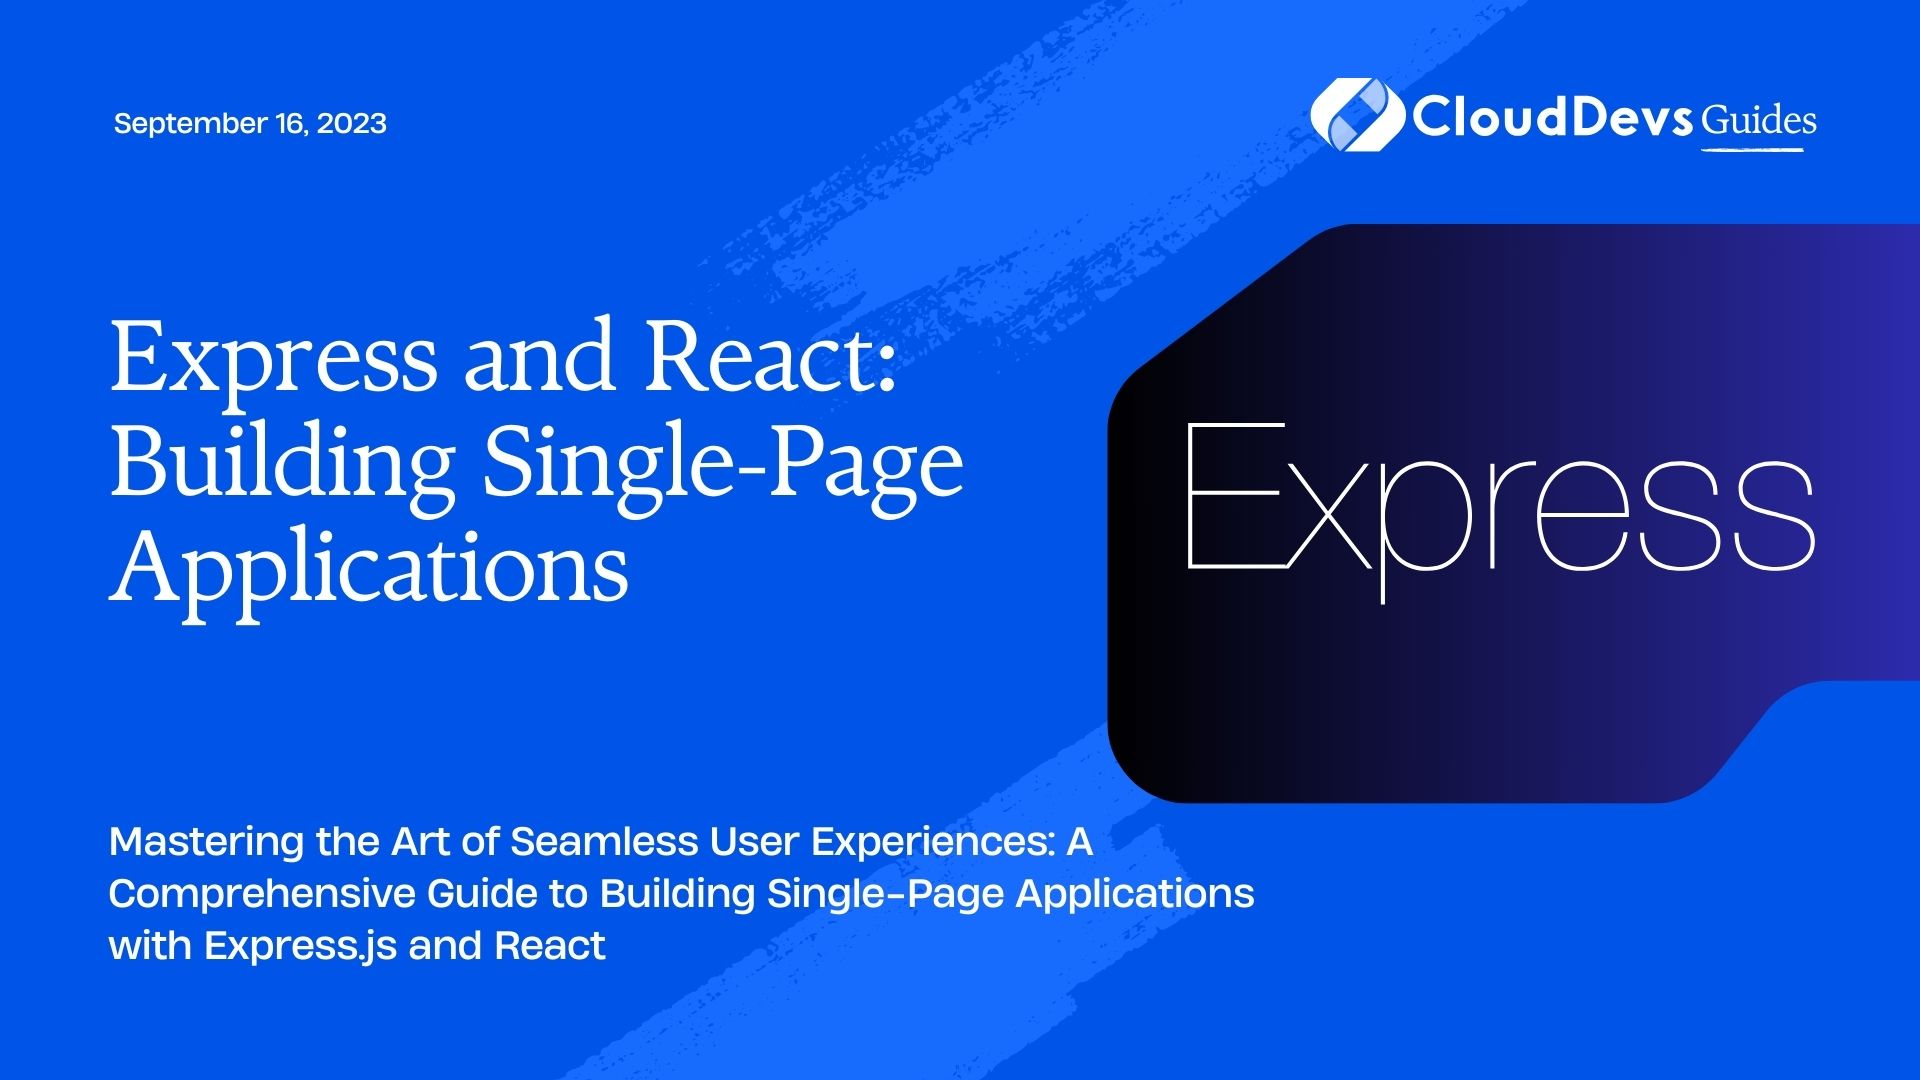 Express and React: Building Single-Page Applications